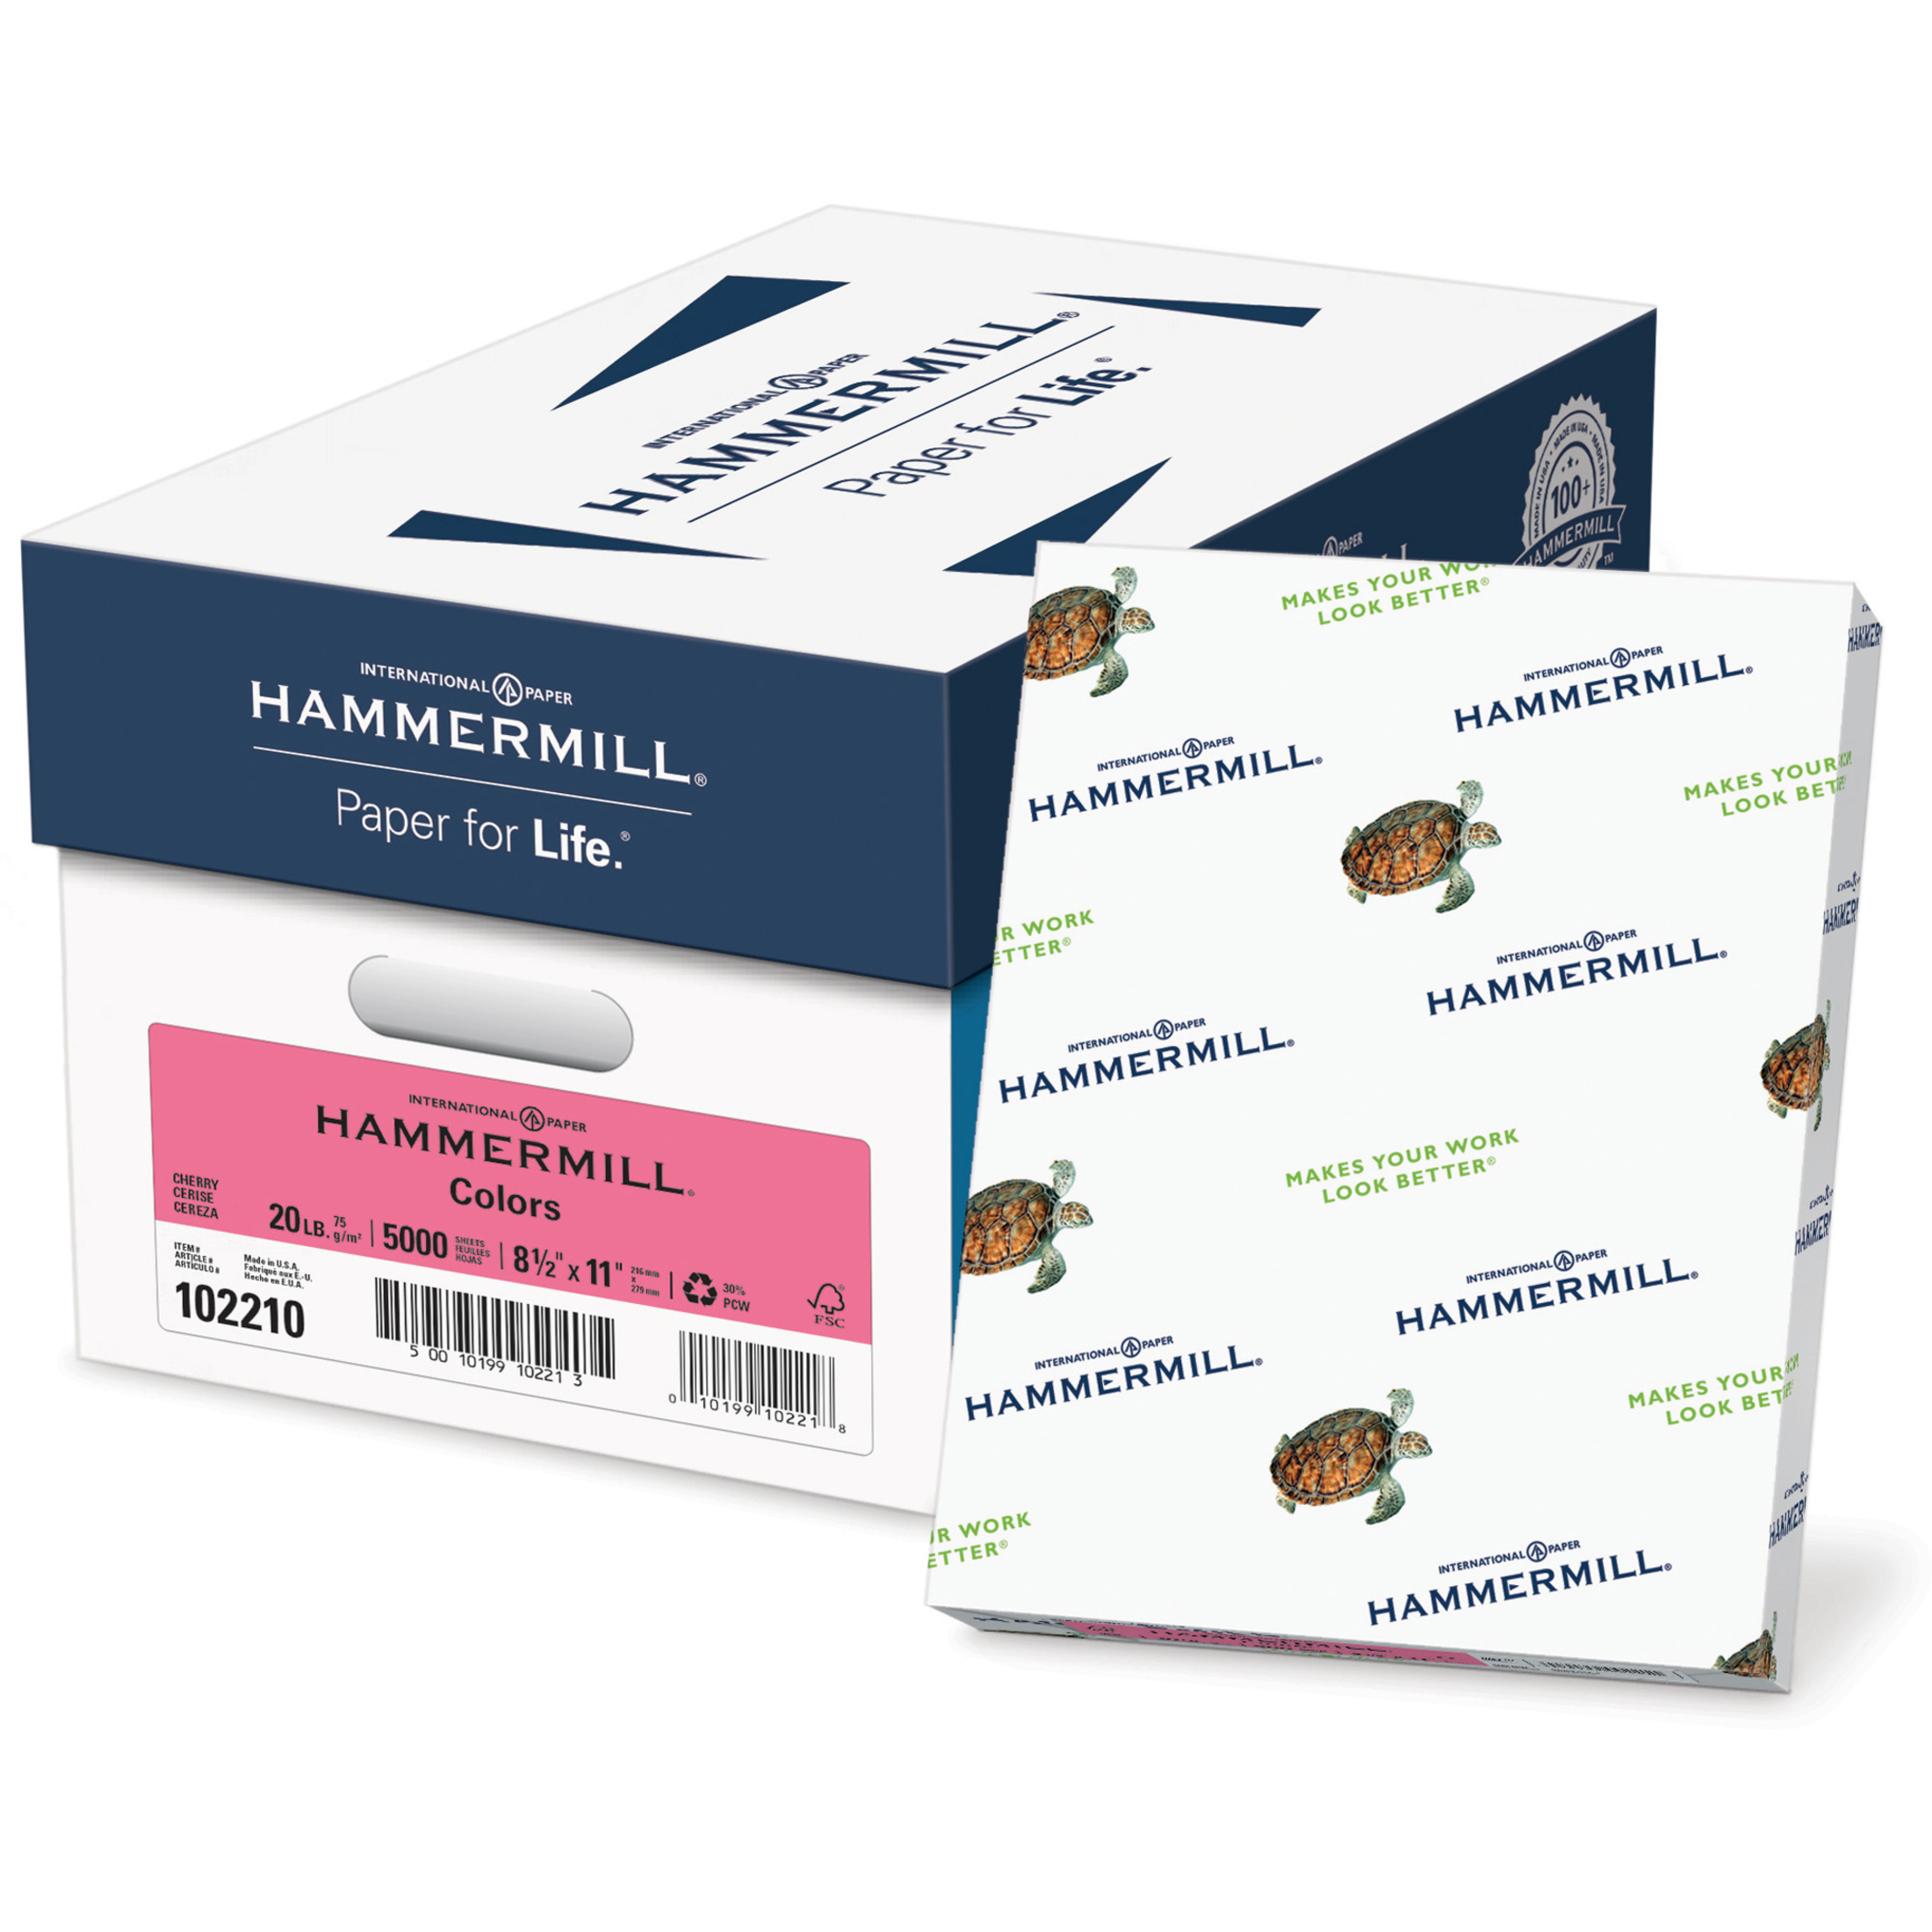 Hammermill Recycled Color Papers, 8.5" x 11", 500 Sheets - image 2 of 2